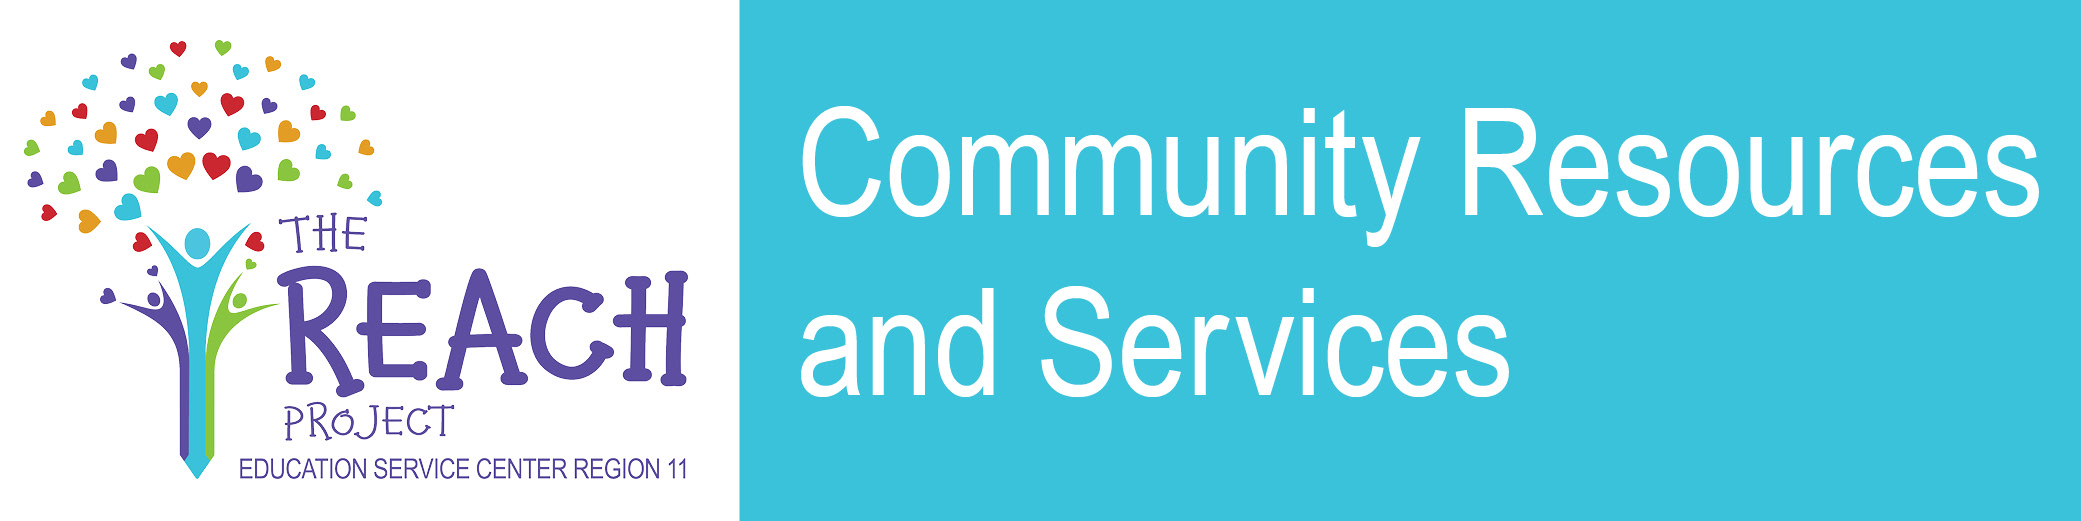 Community Resources and Services